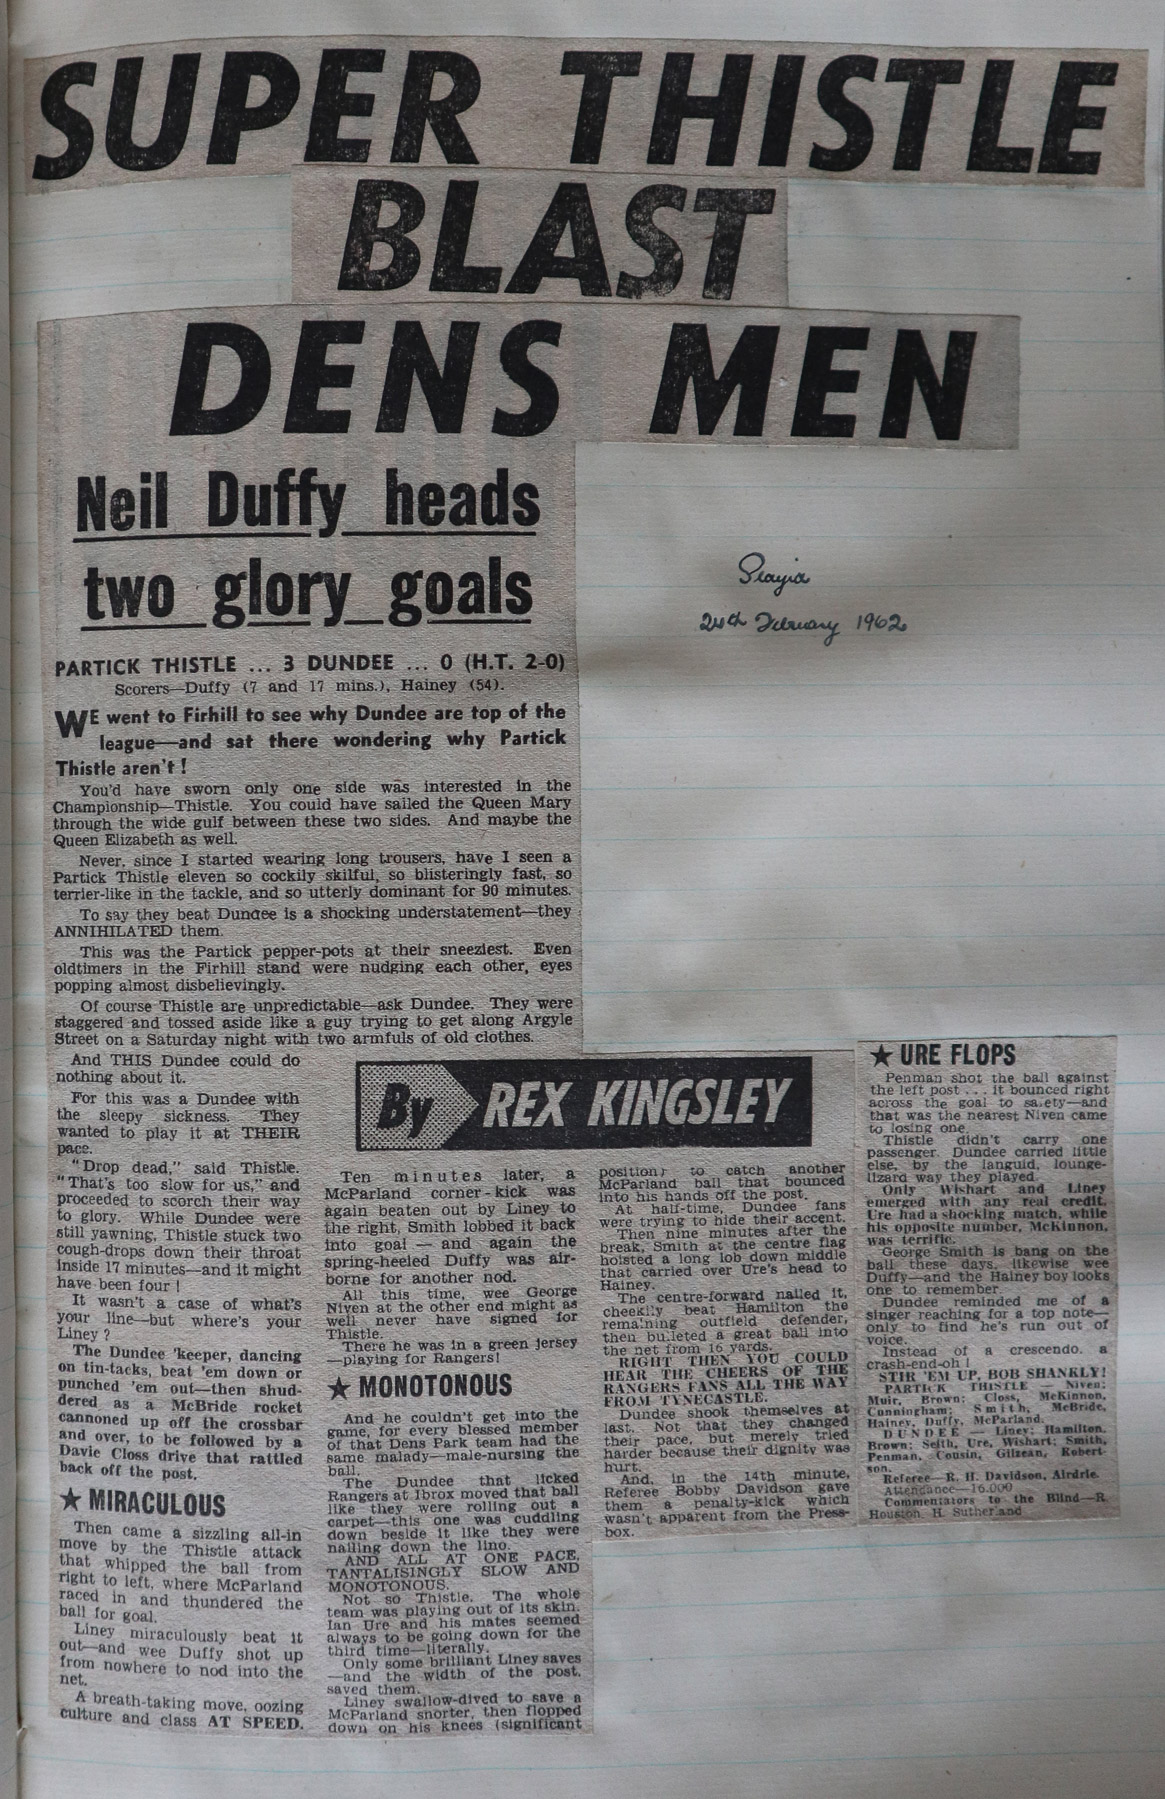 1962-02-24_Partick_Thistle_3-0_Dundee_L1_1